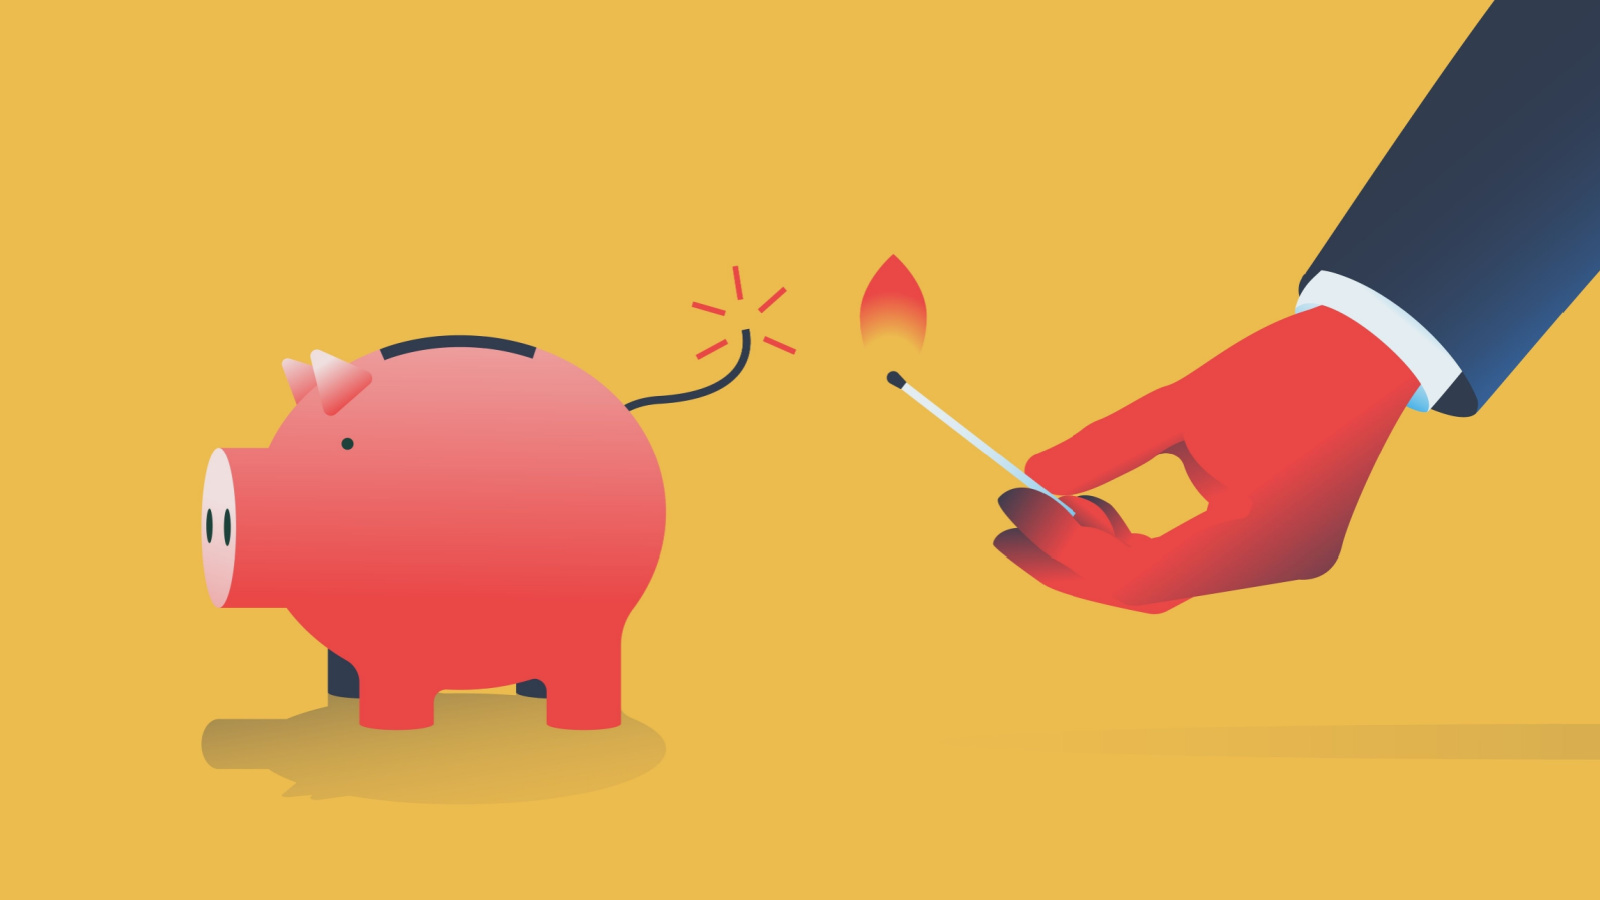 Graphic of red piggy bank with a bomb fuse as a tail about to be lit by a hand holding a match on fire. Yellow background.